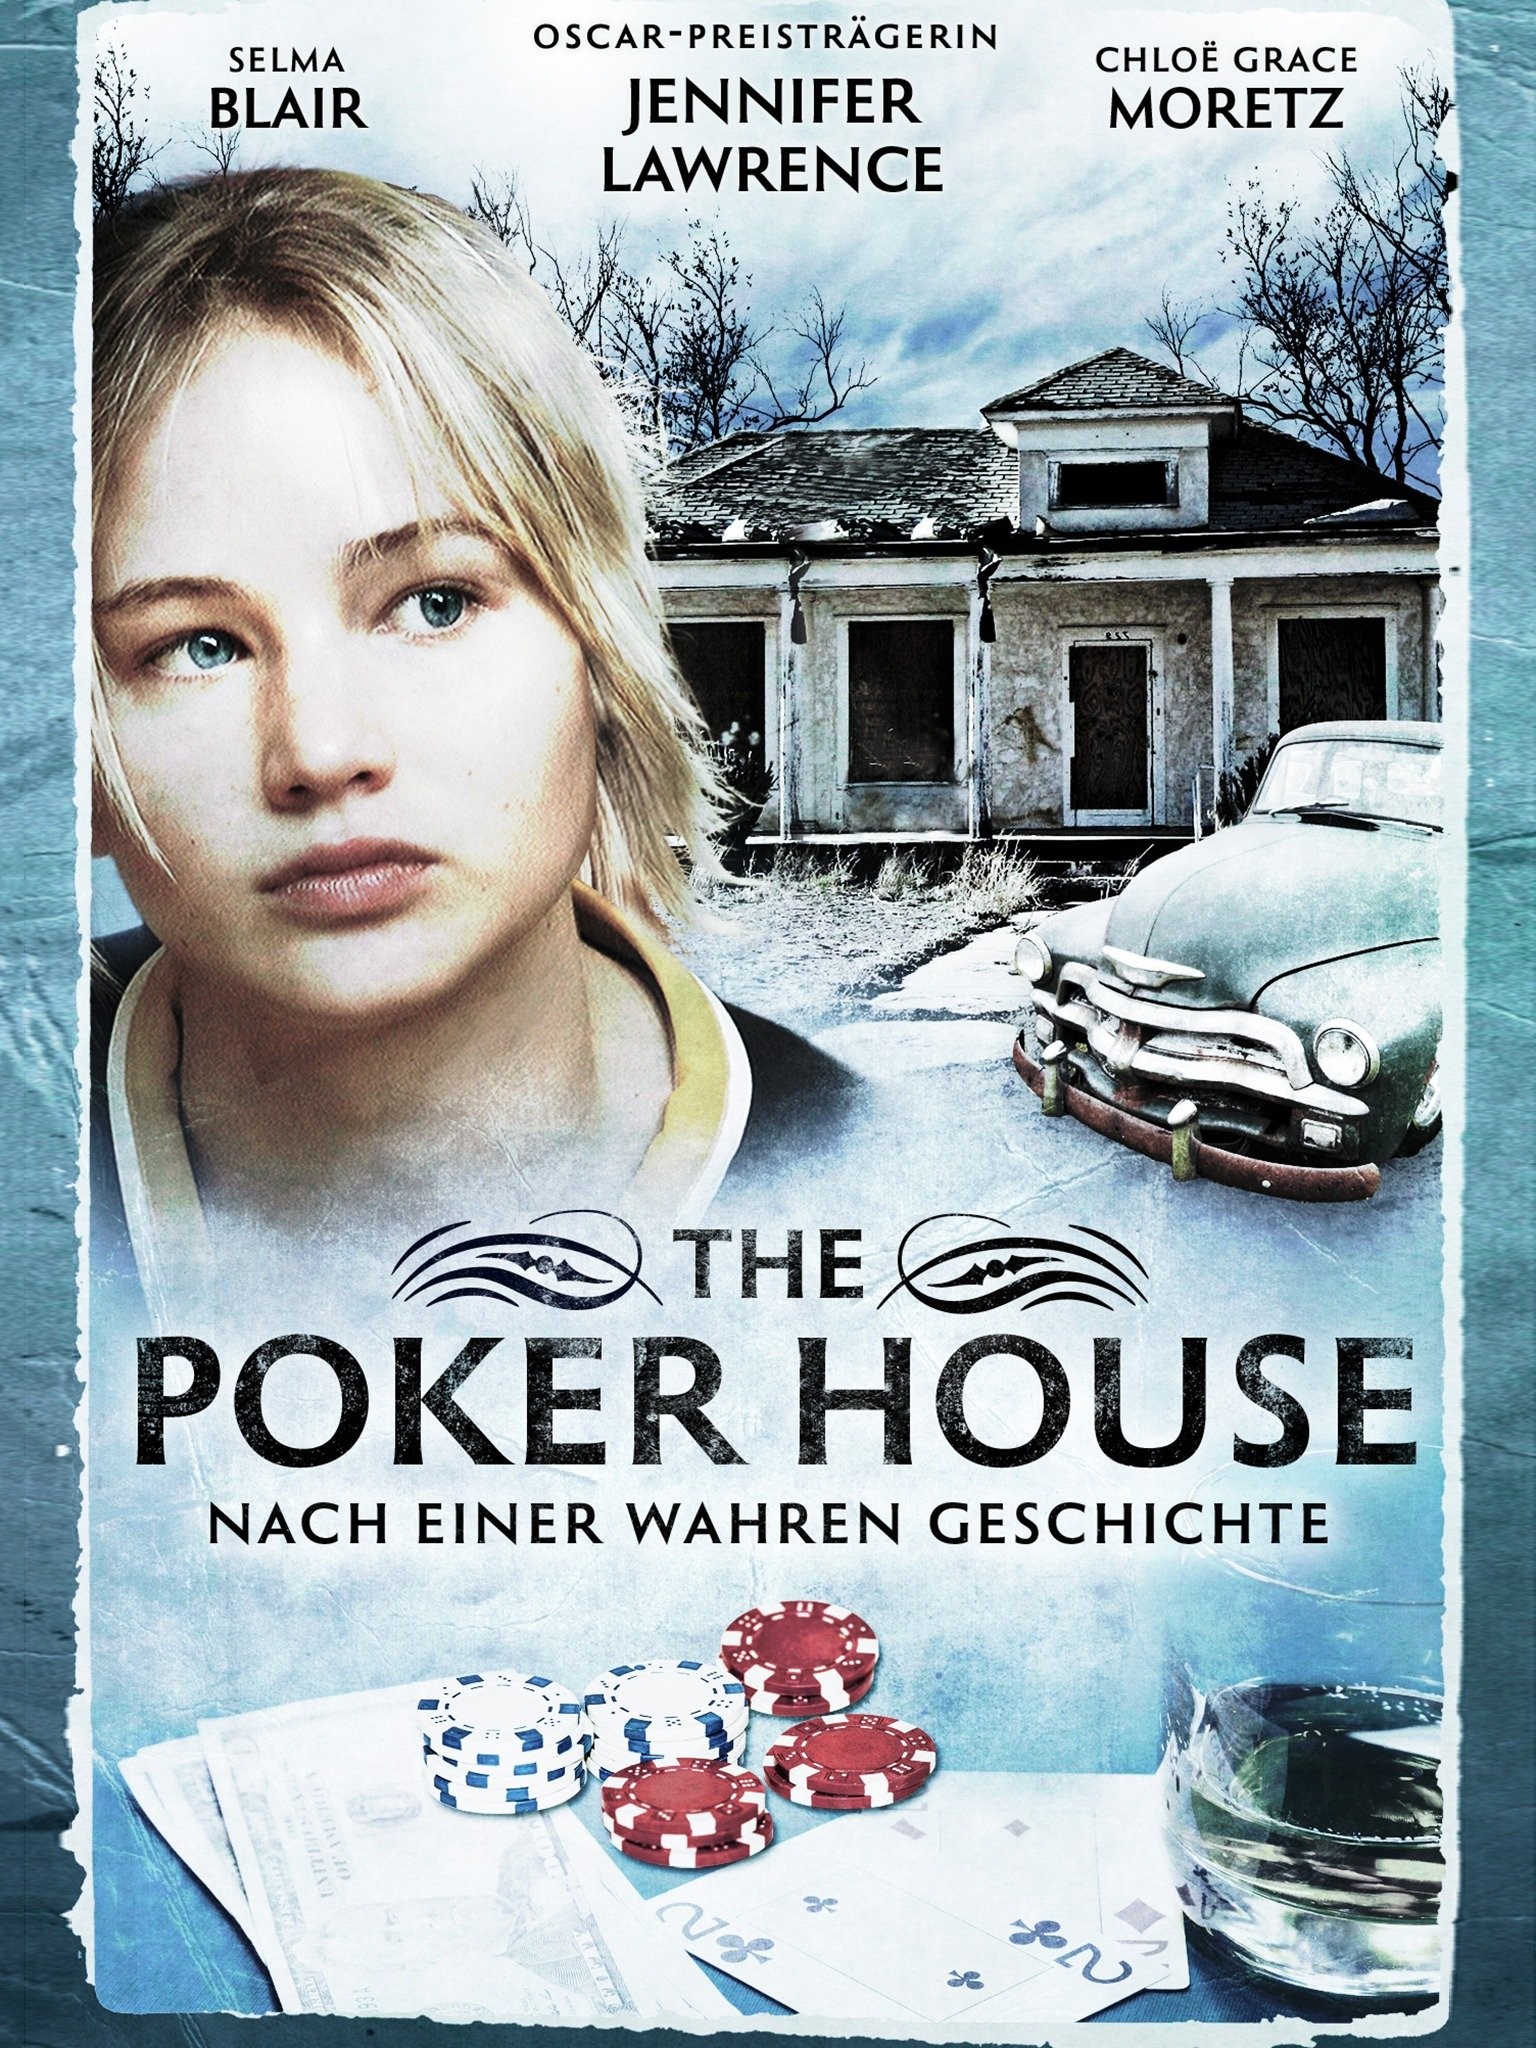 Cast of the poker house